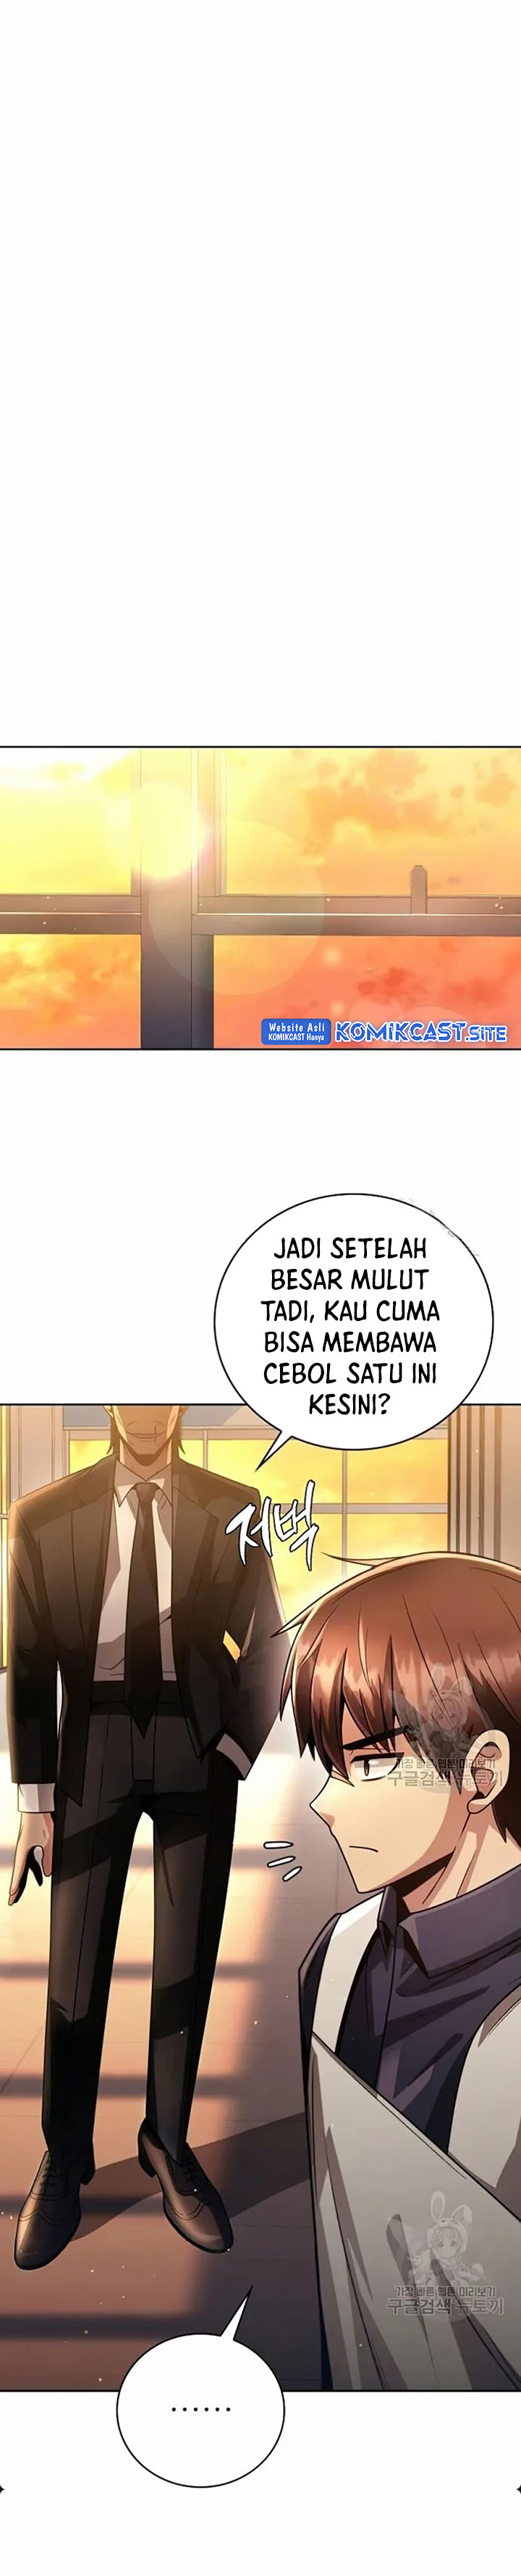 Dilarang COPAS - situs resmi www.mangacanblog.com - Komik clever cleaning life of the returned genius hunter 029 - chapter 29 30 Indonesia clever cleaning life of the returned genius hunter 029 - chapter 29 Terbaru 15|Baca Manga Komik Indonesia|Mangacan